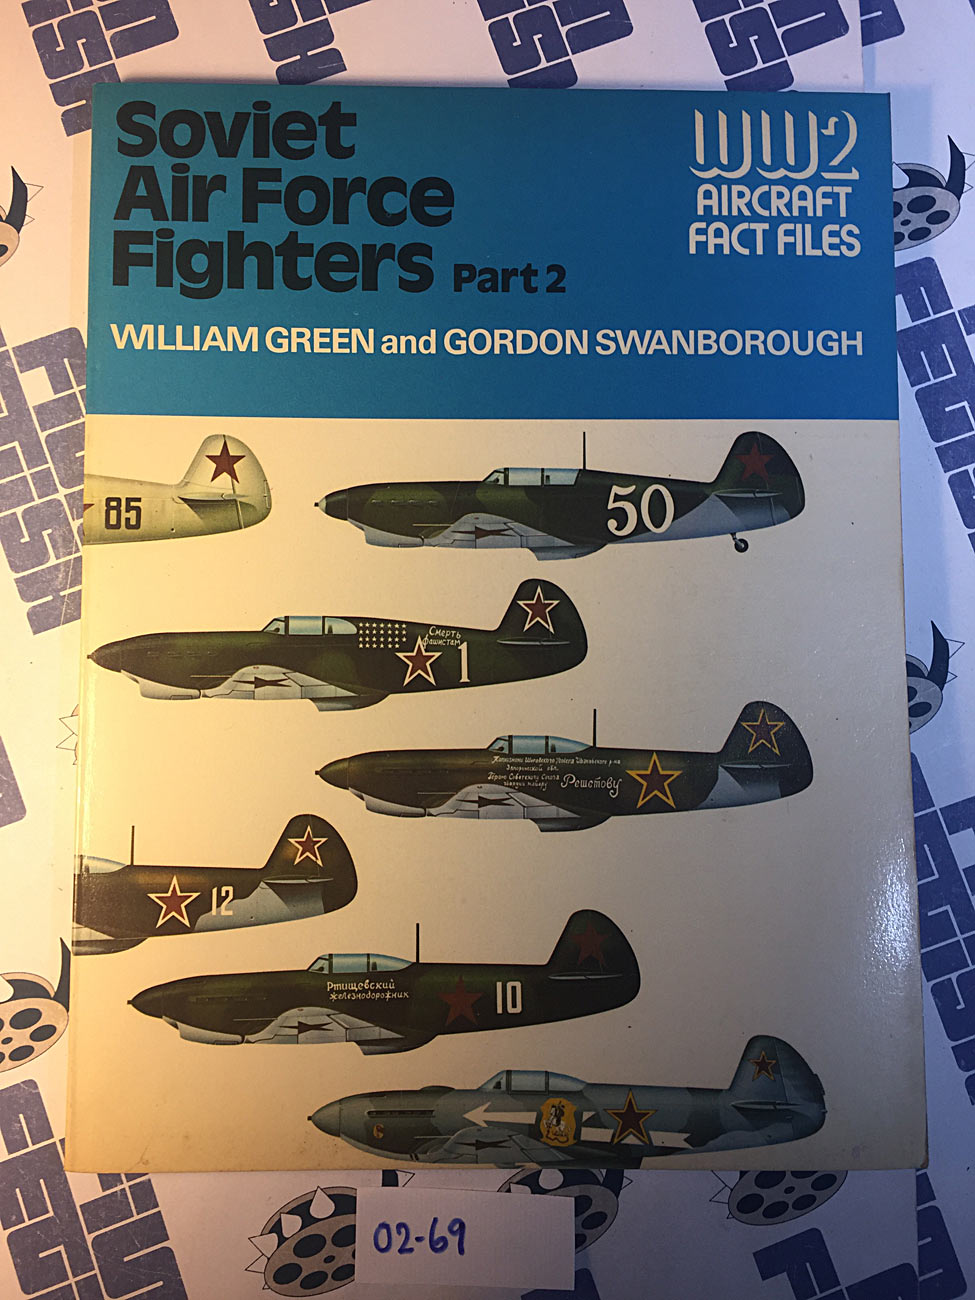 Soviet Air Force Fighters Part 2 WW2 Aircraft Fact Files, William Green, Gordon Swanborough [269]